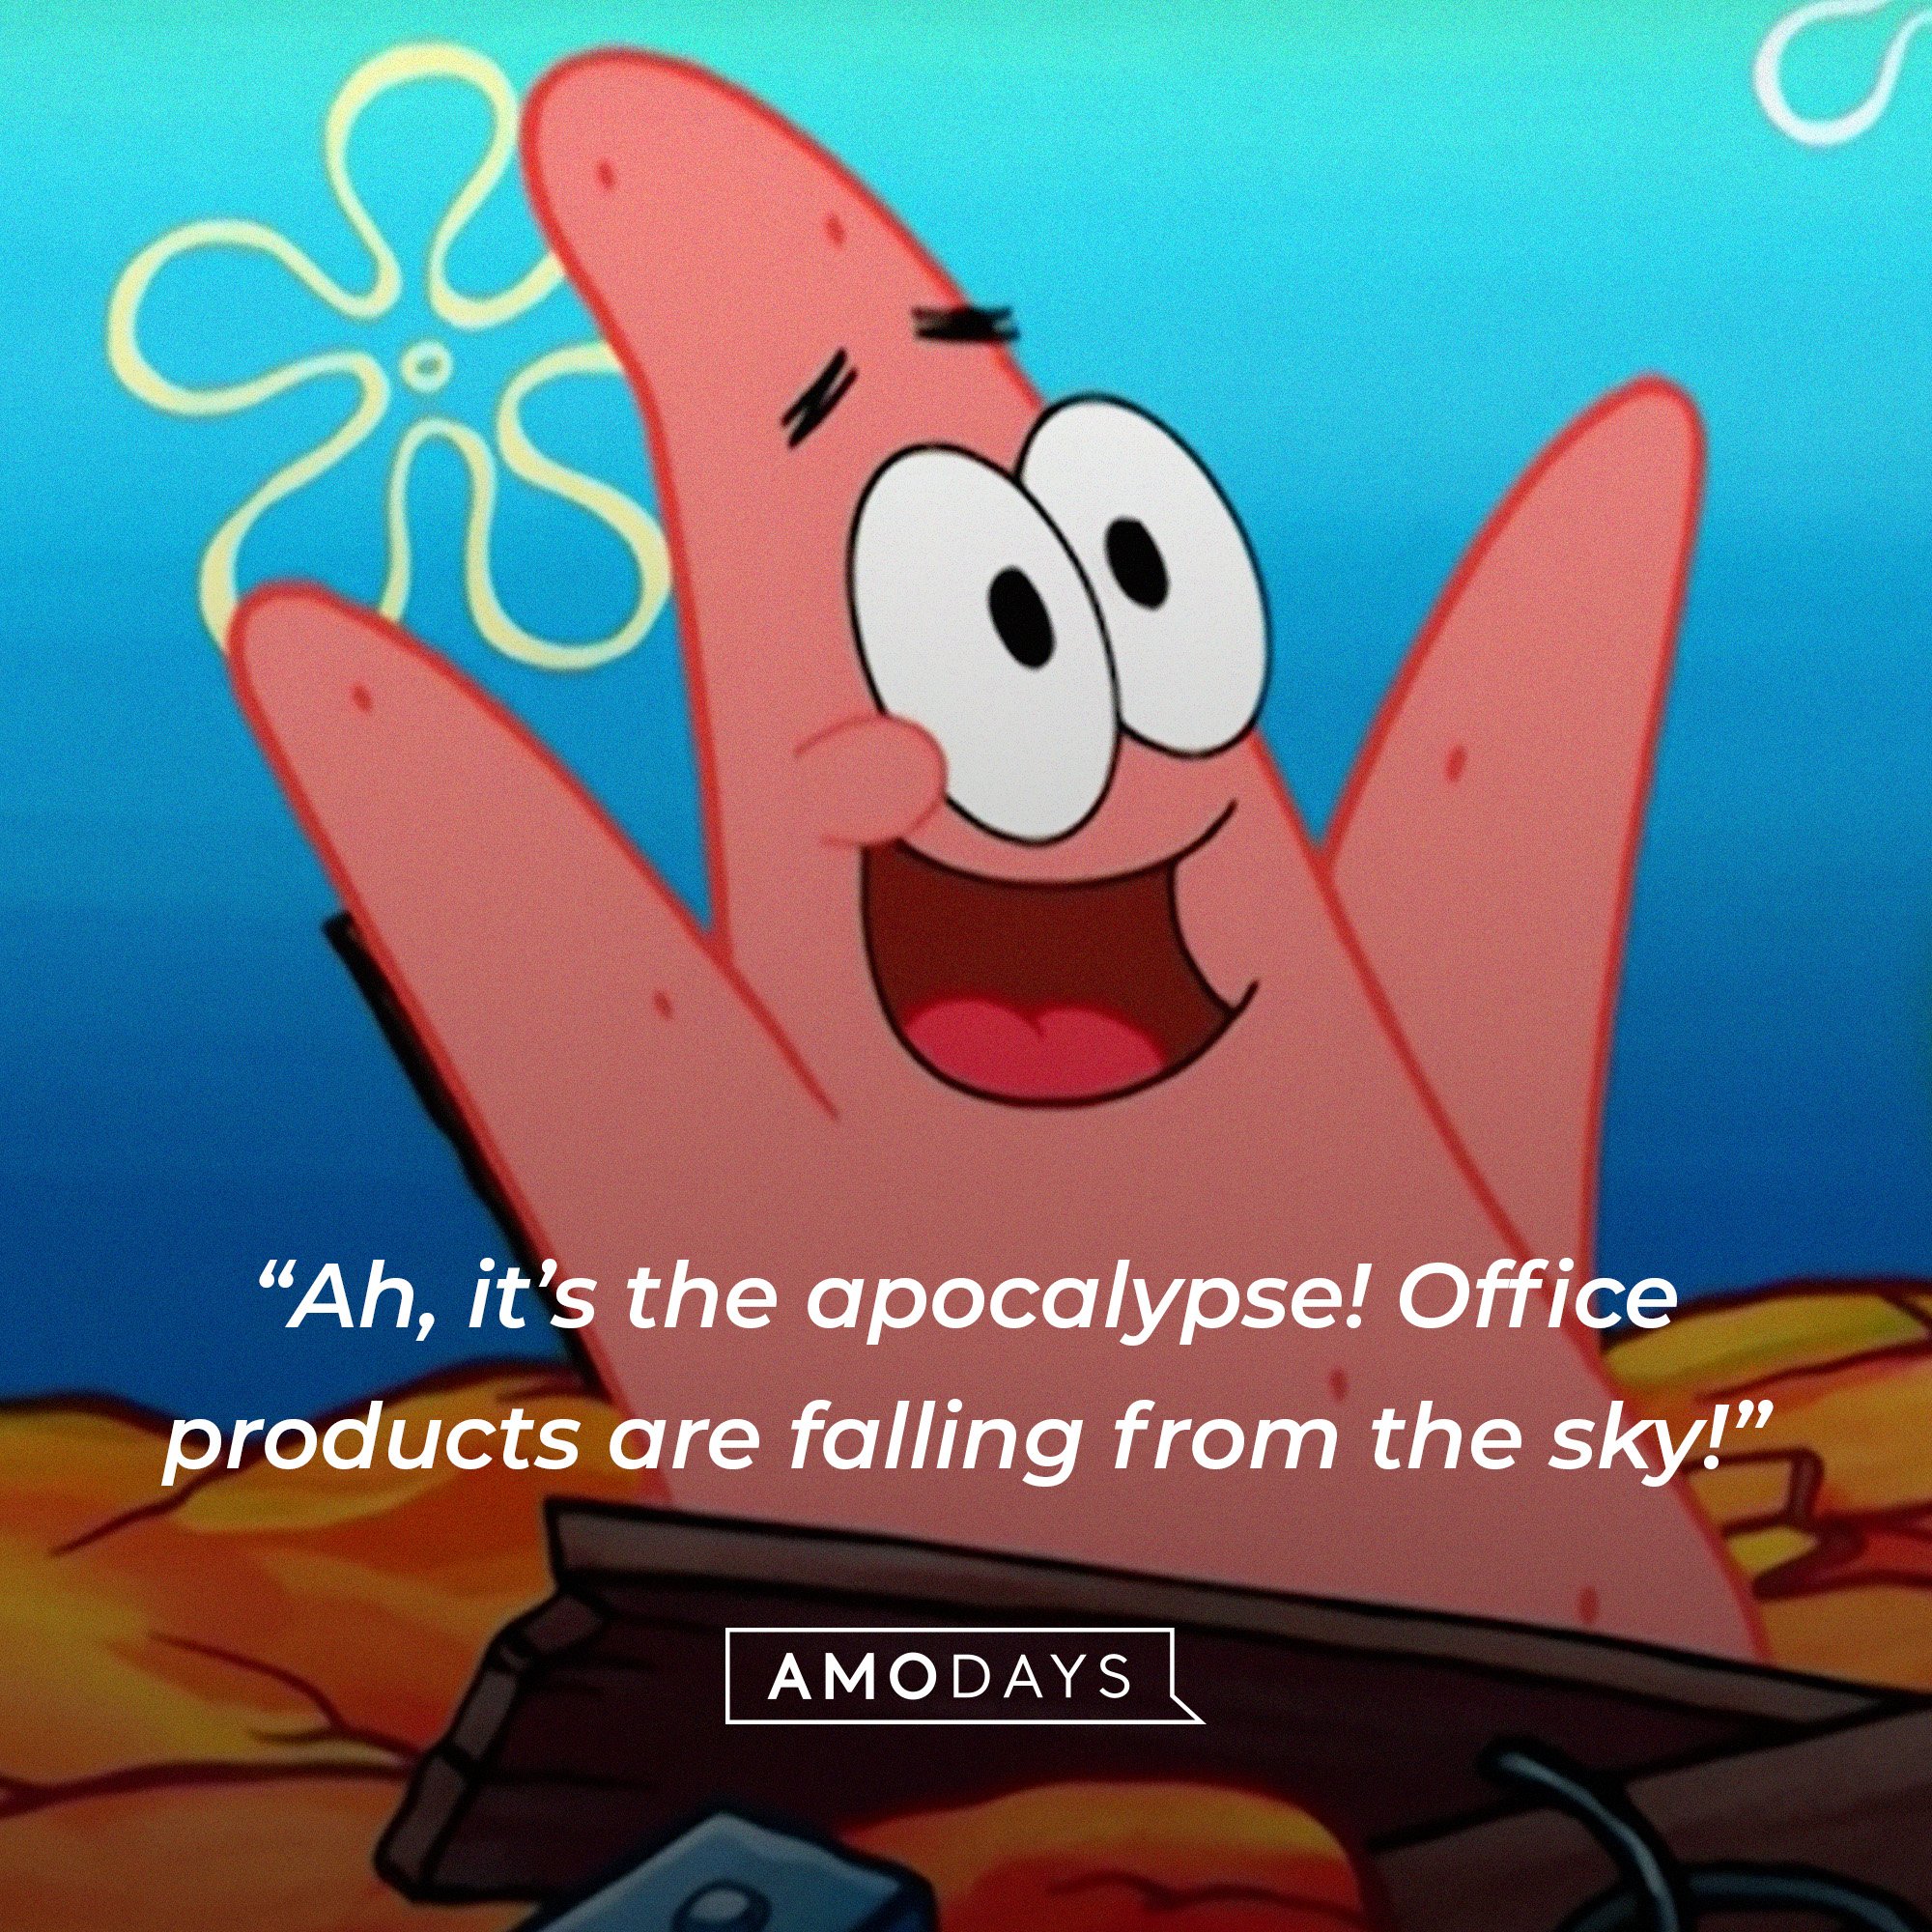 Patrick Star’s quote: “Ah, it’s the apocalypse! Office products are falling from the sky!” | Image: AmoDays